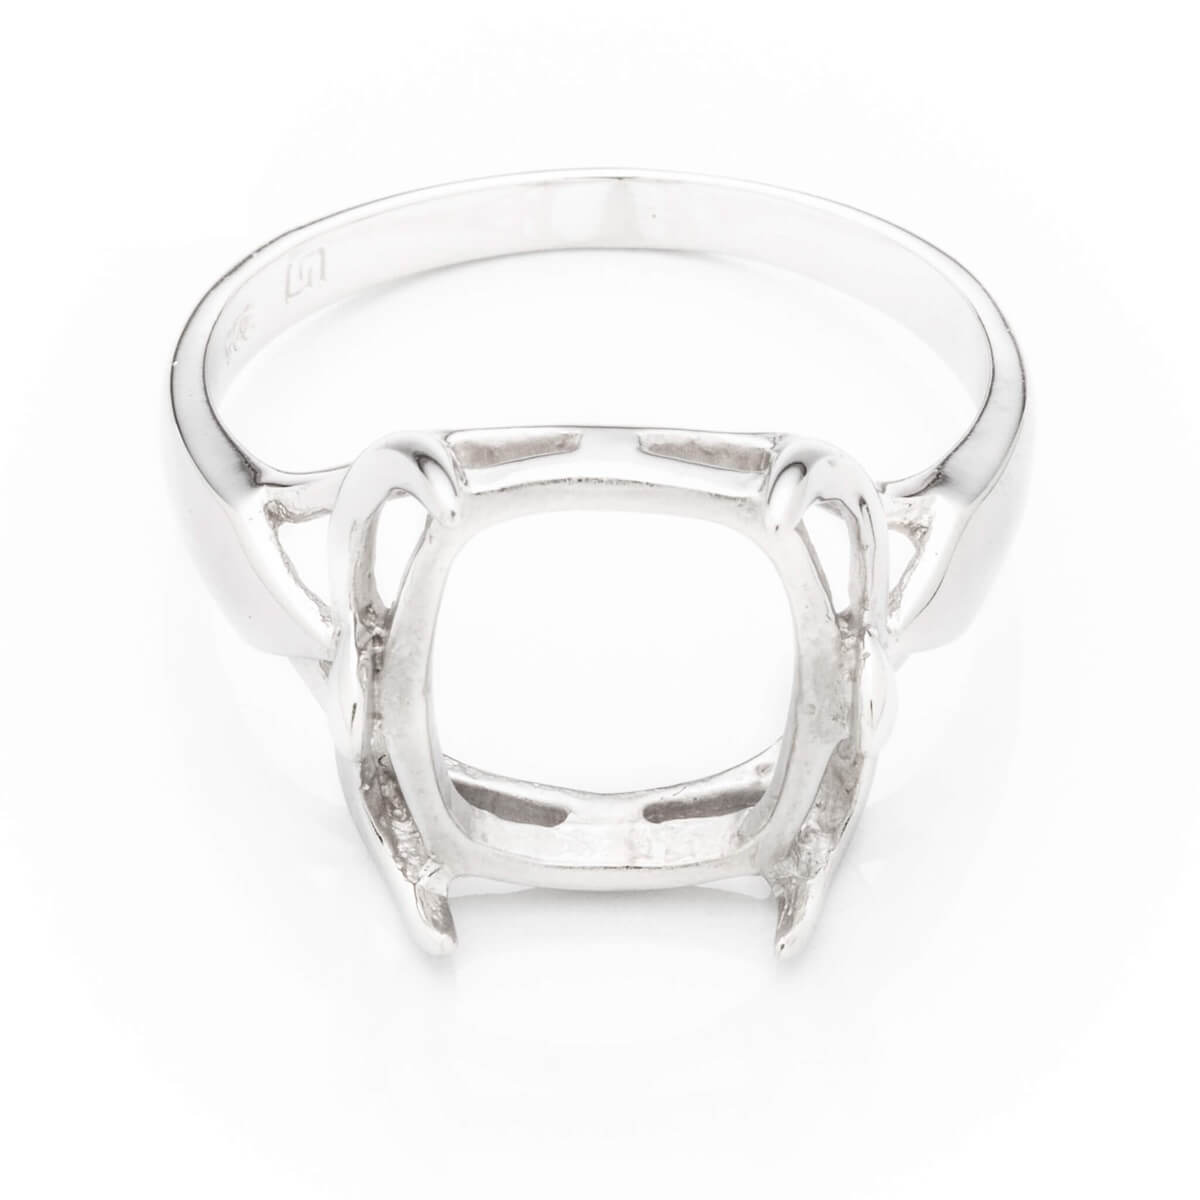 Ring with Rectangular Prongs Mounting in Sterling Silver 12x13mm 